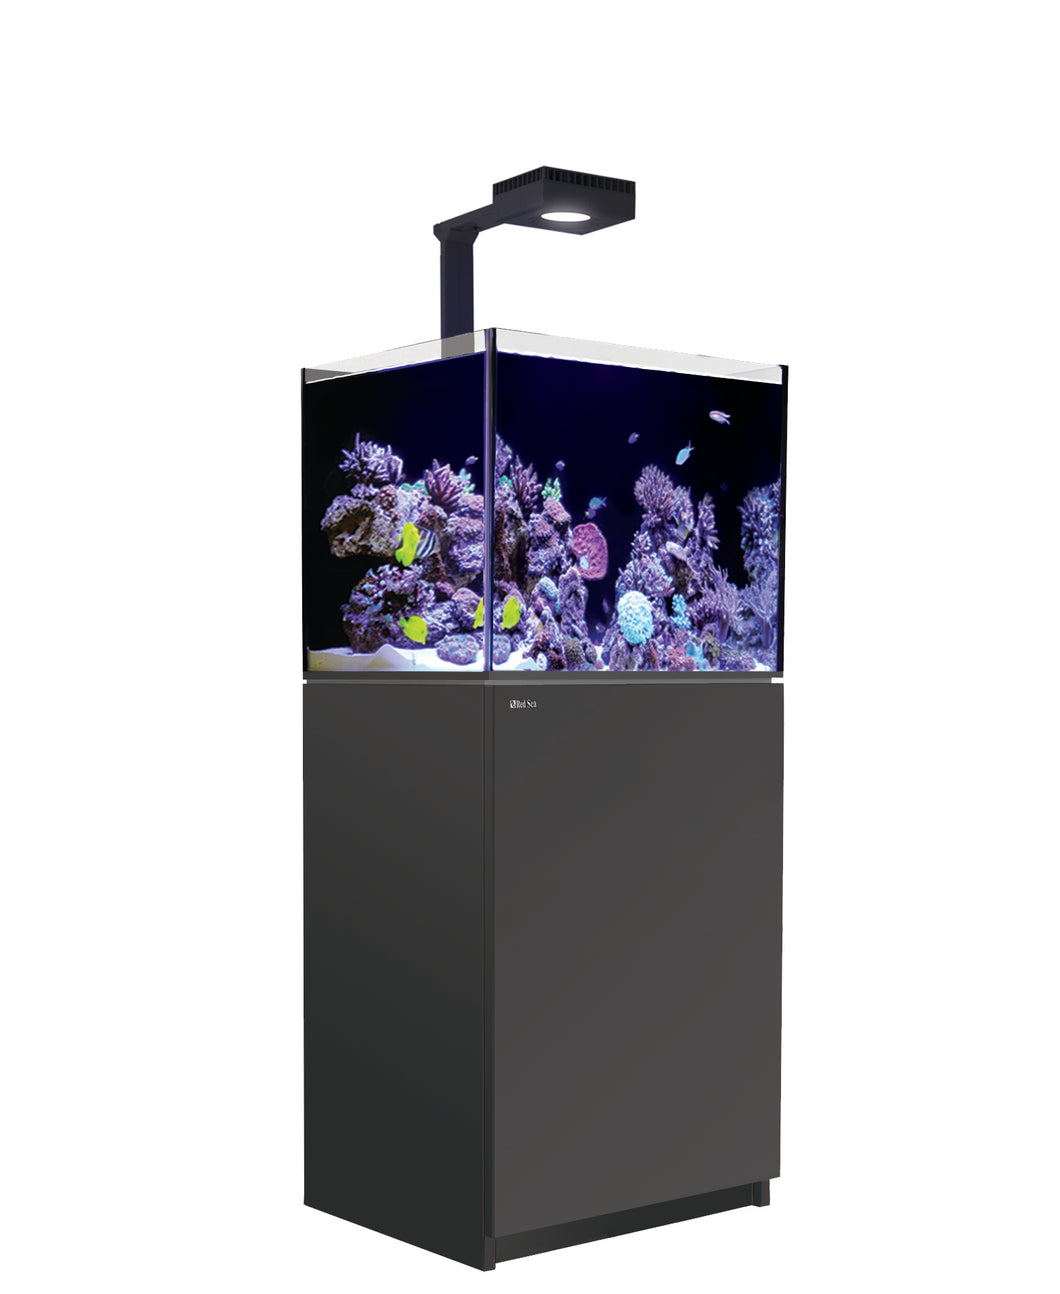 REEFER 170 G2 Deluxe System - Black (Including 1x ReefLED 90 & Mount Arm) available at Coral Passion, Essex